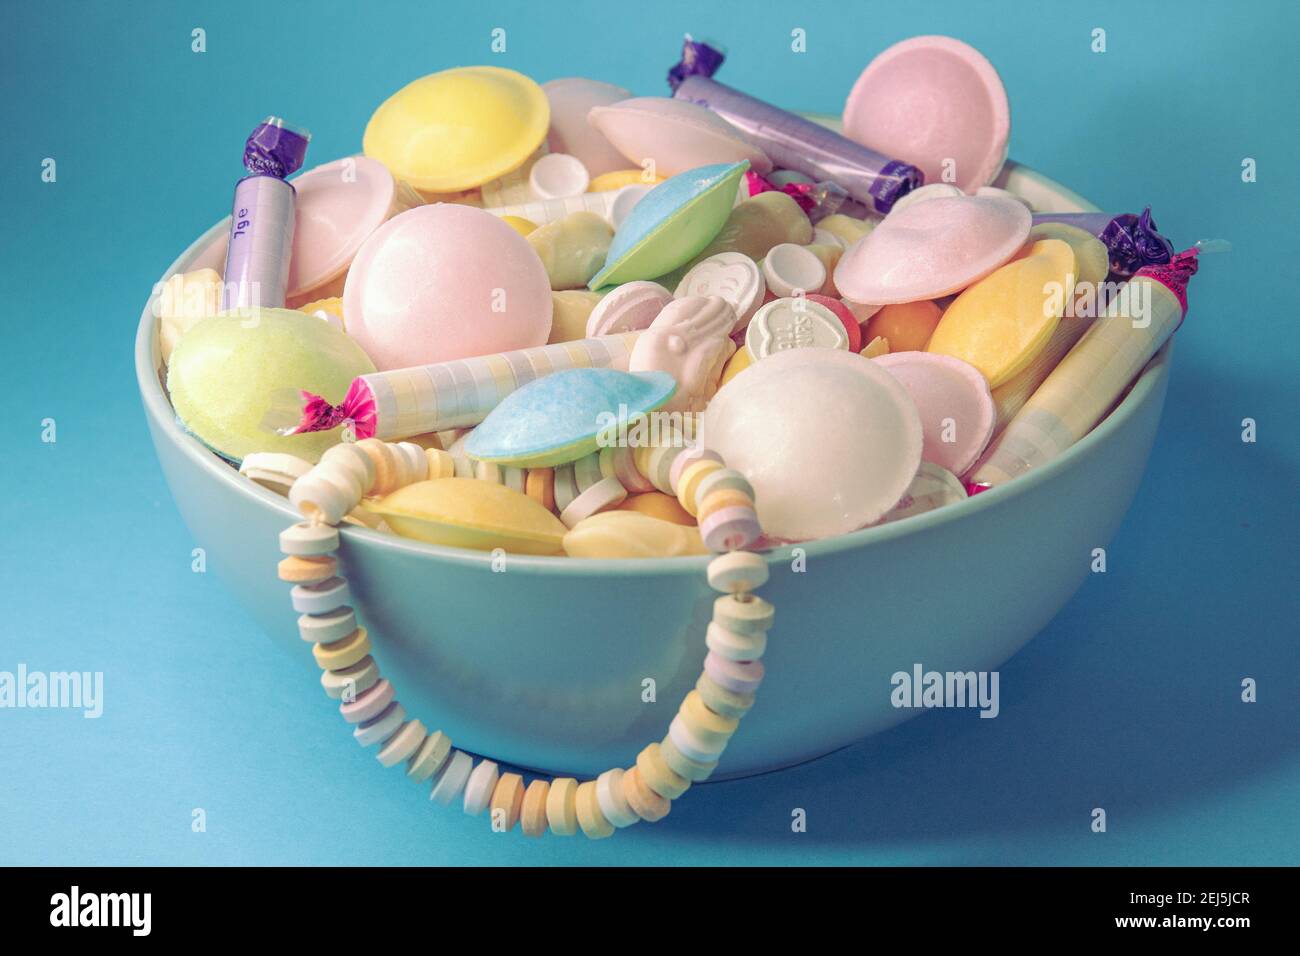 Blue bowl filled with classic British sweets and candy Stock Photo